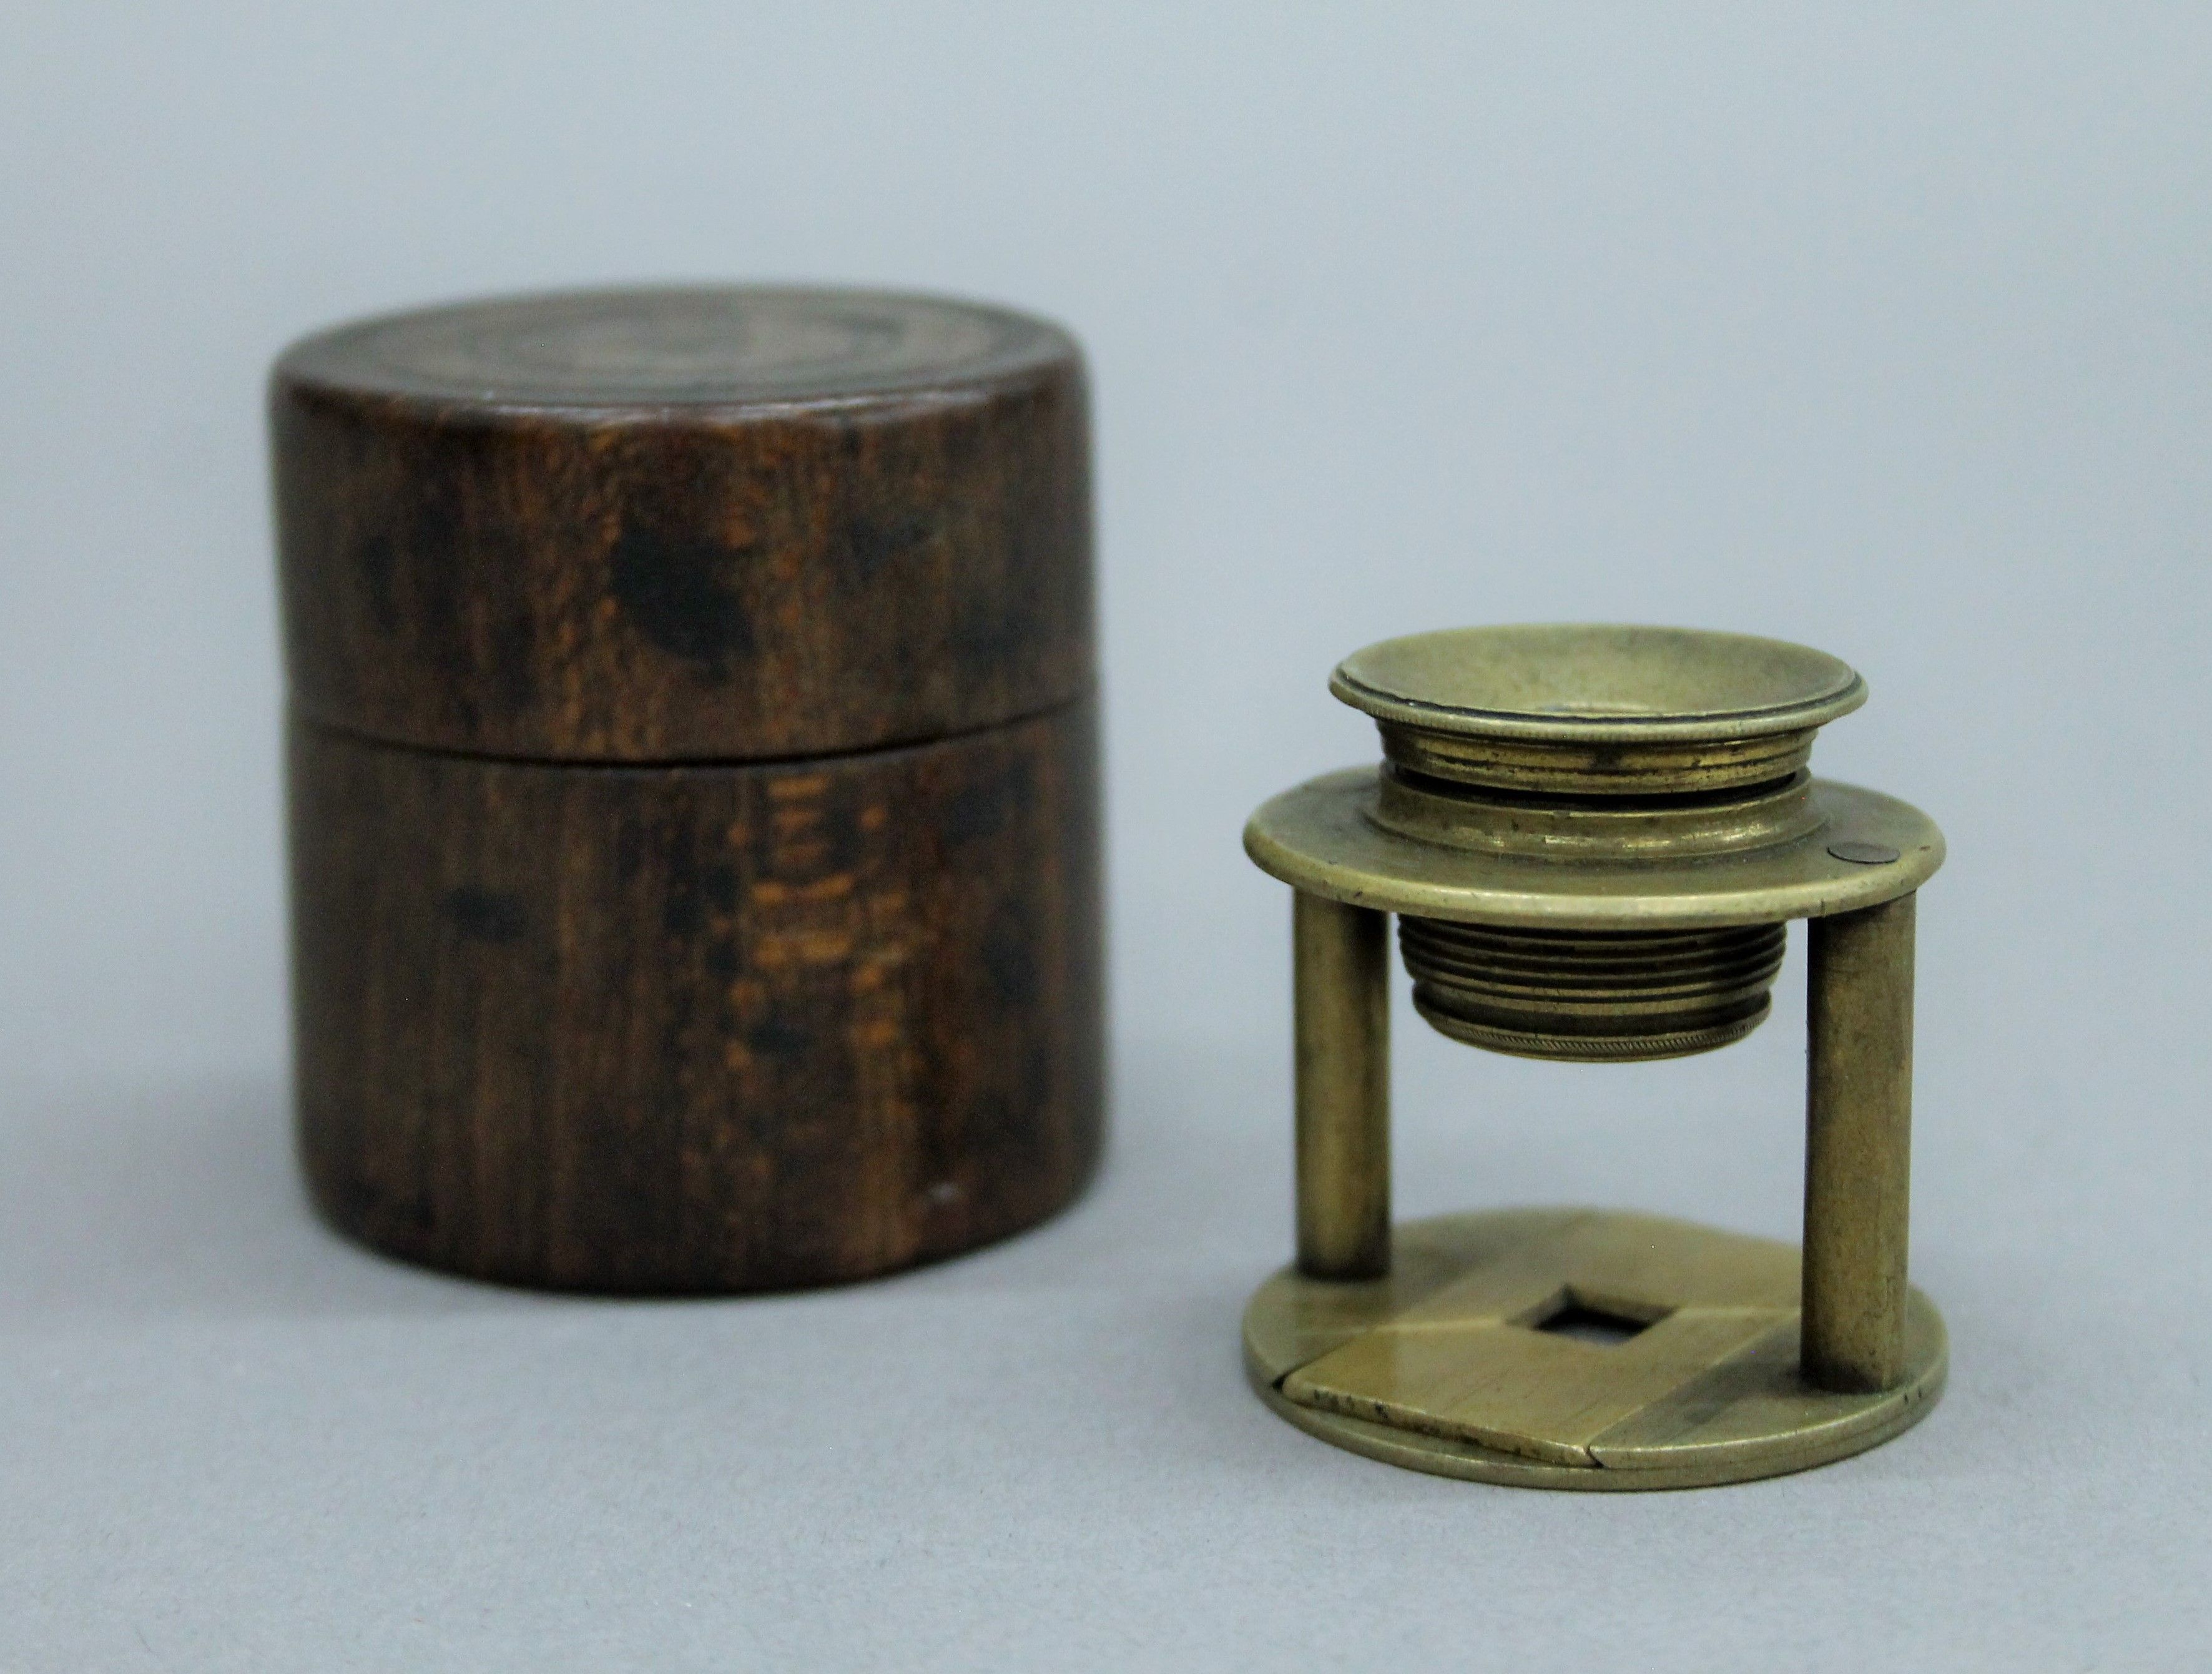 A 19th century brass travelling microscope in wooden case. The case 5 cm high.